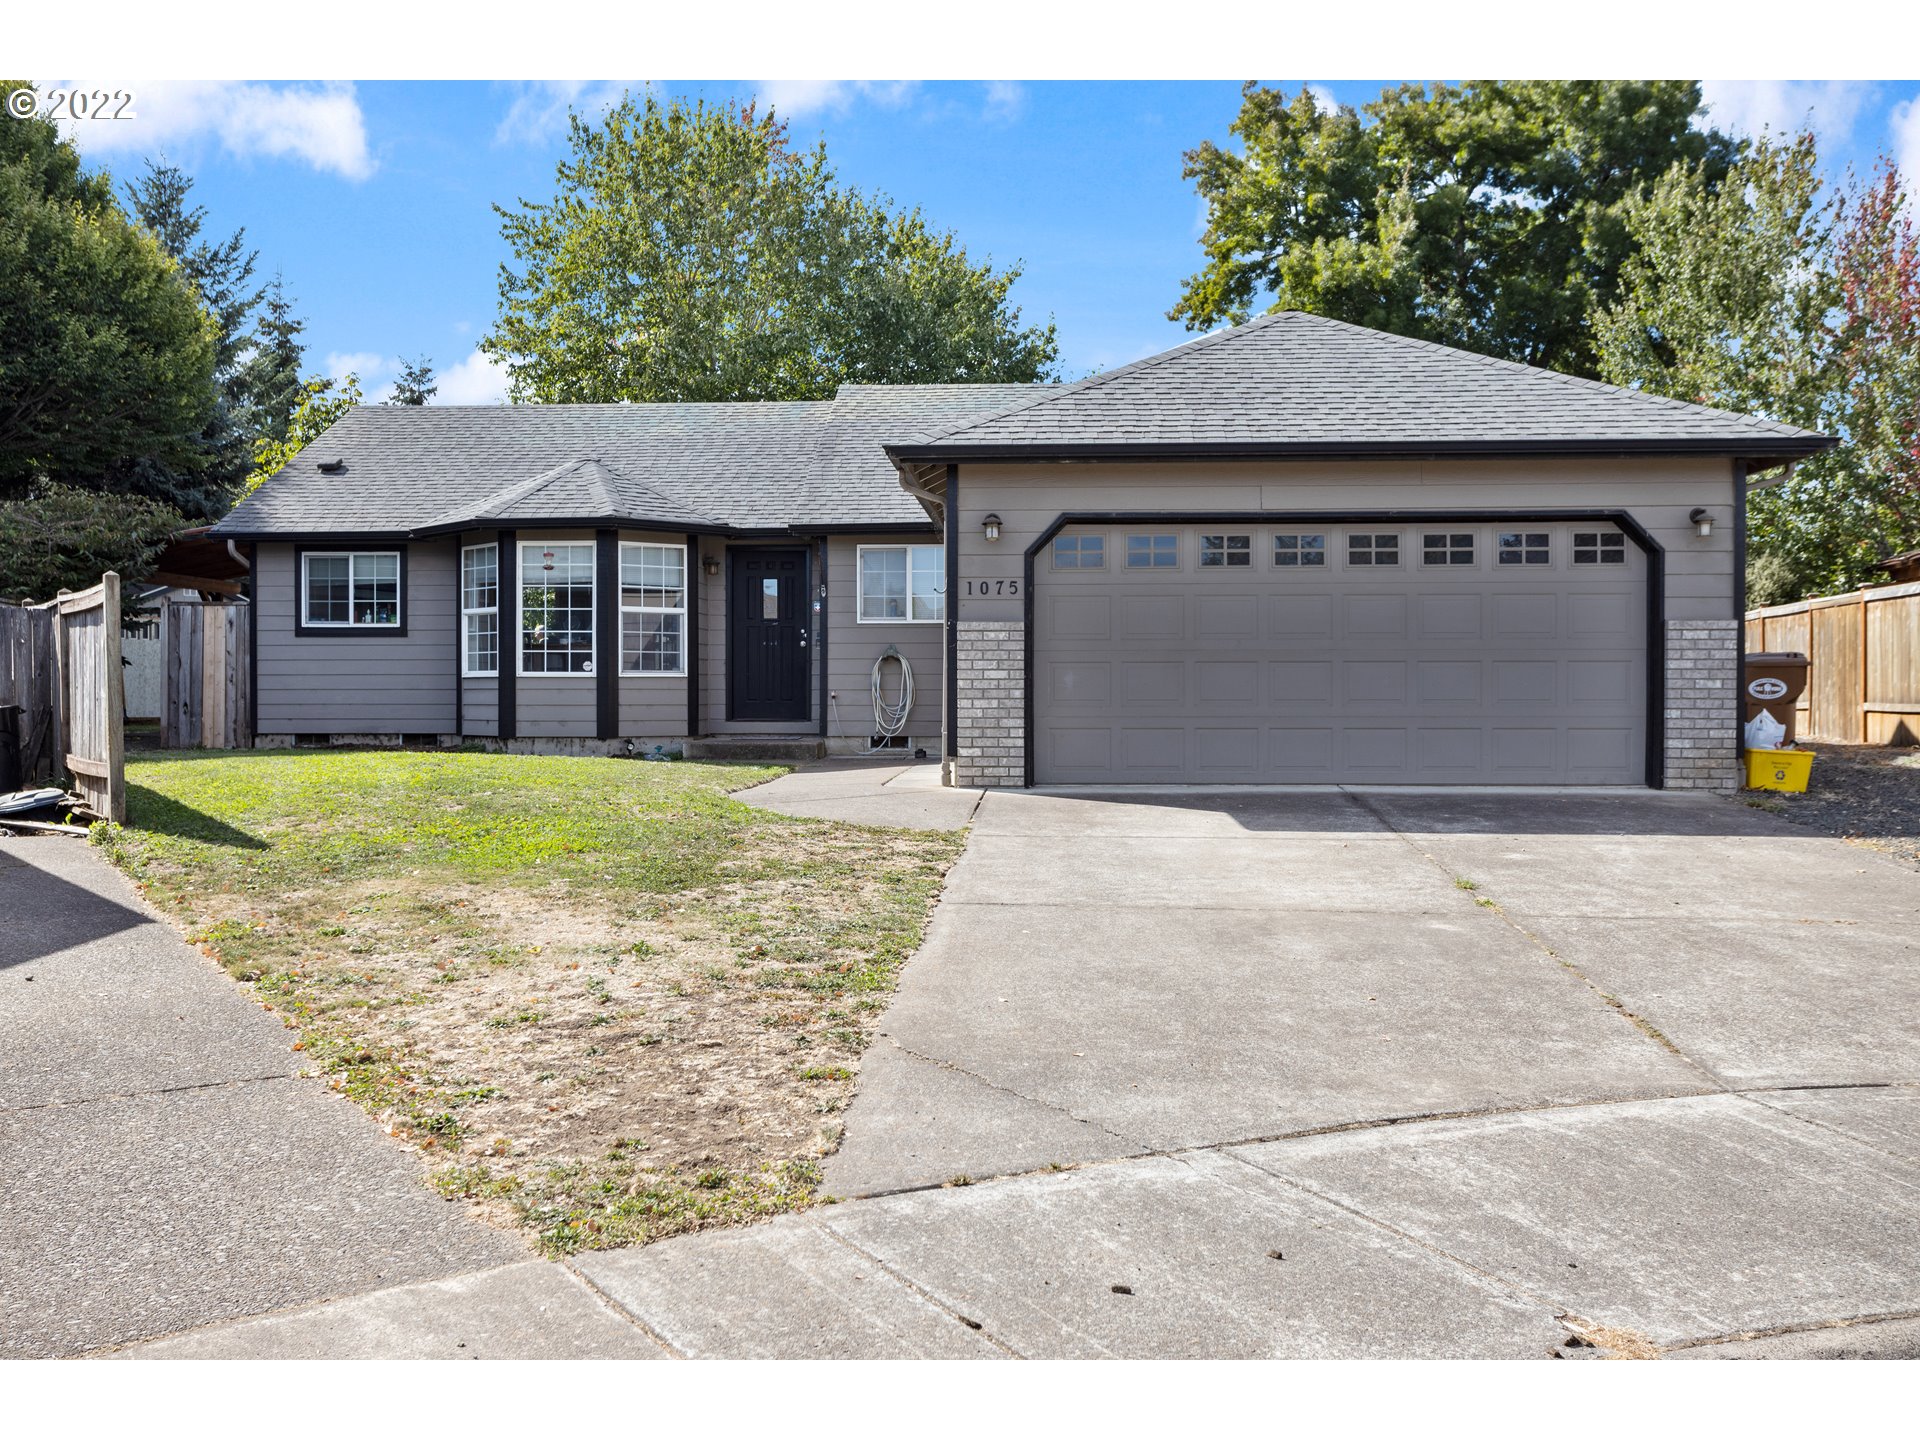 1075 W 17TH AVE, Junction City, OR 